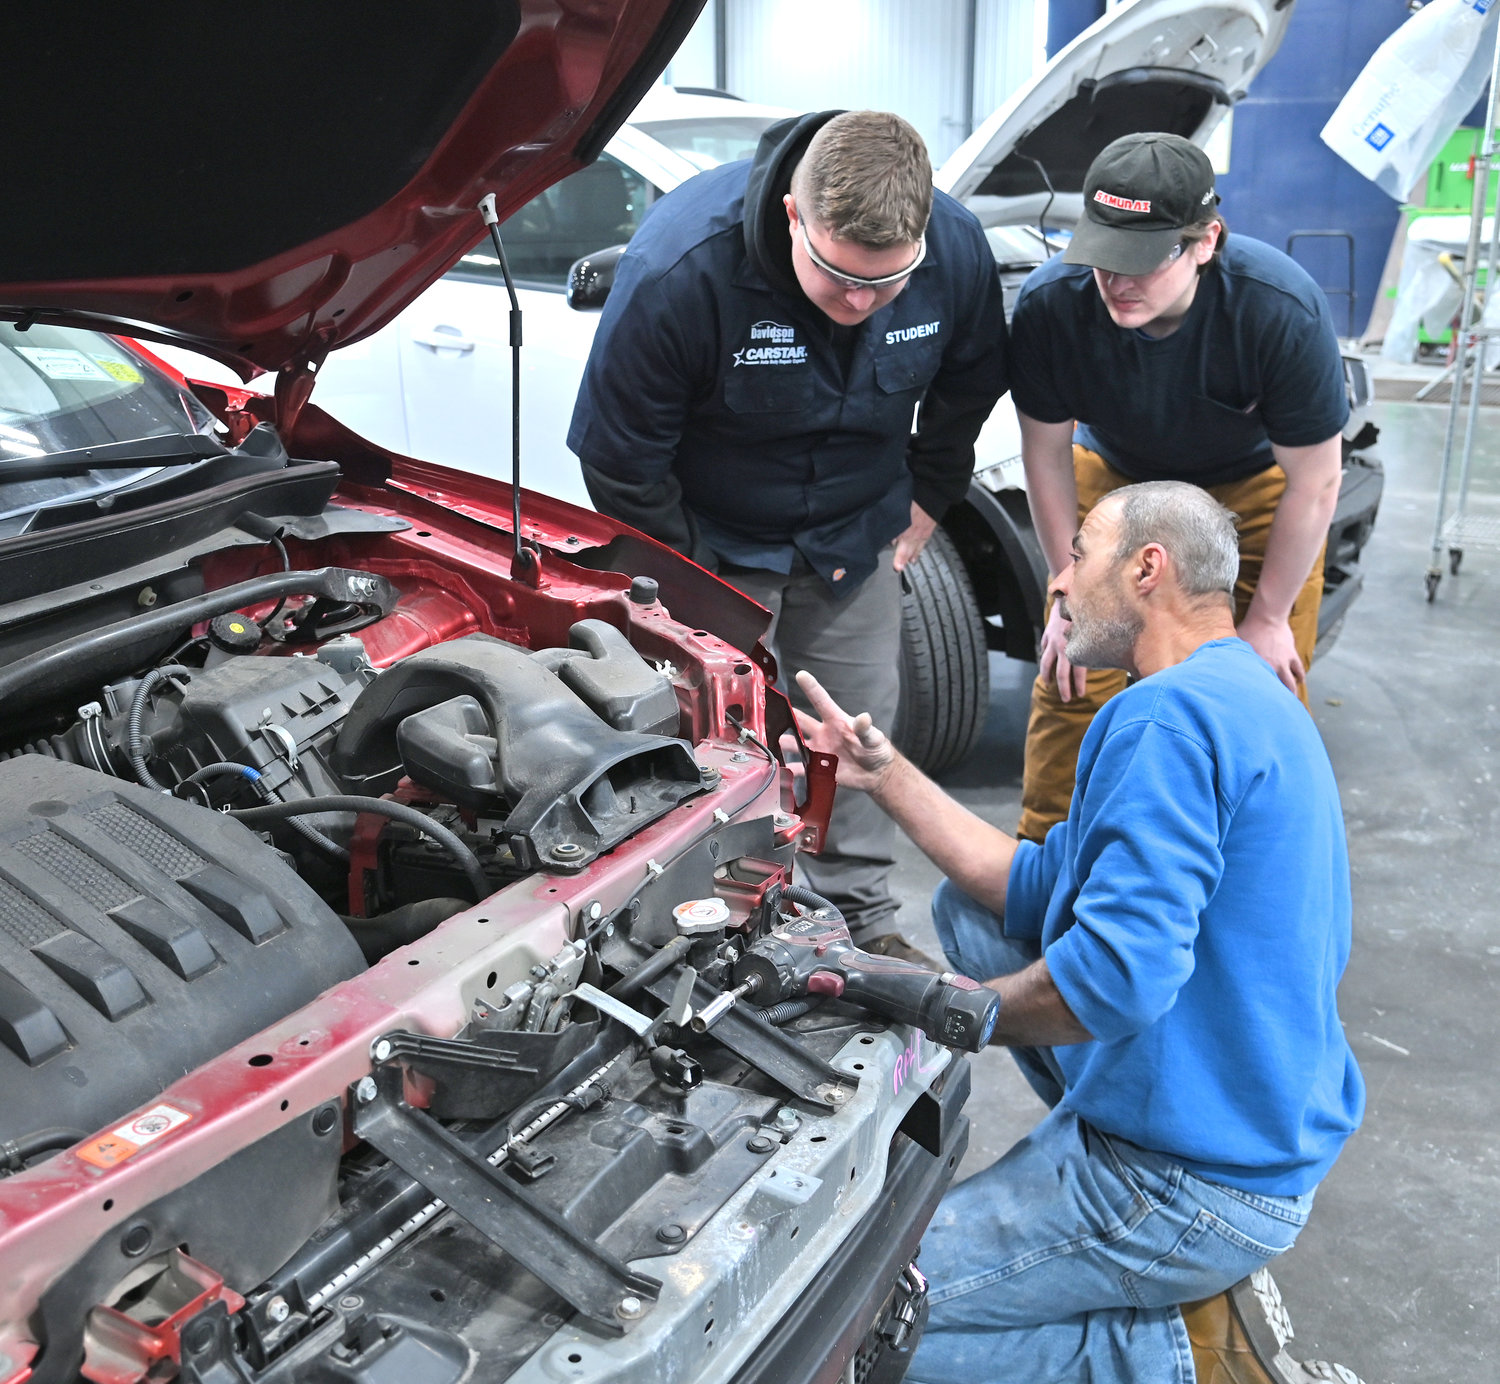 Duane Roser, a body technician for 37 years, shows Madison-Oneida BOCES students Trevor Marsden of Camden and Tobiah Garcia of VVS the process as he repairs a car Oct. 21 at the CARSTAR Davidson Collision facility in Rome.